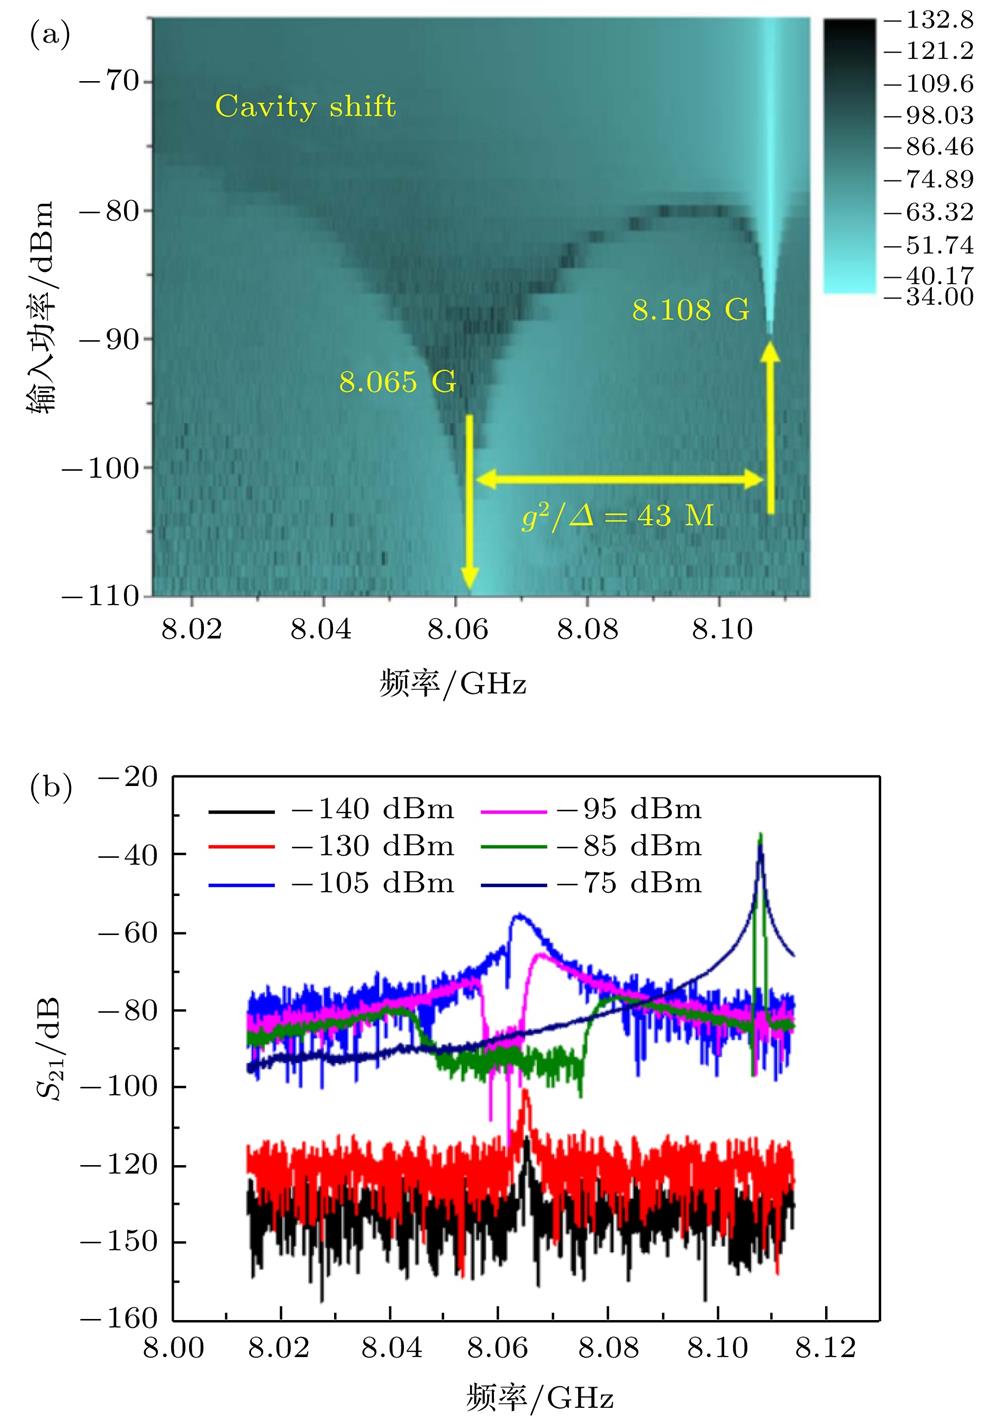 The power change scan S21 of 3D Transmon: (a) Intensity graph of S21; (b) partial S21 curve.